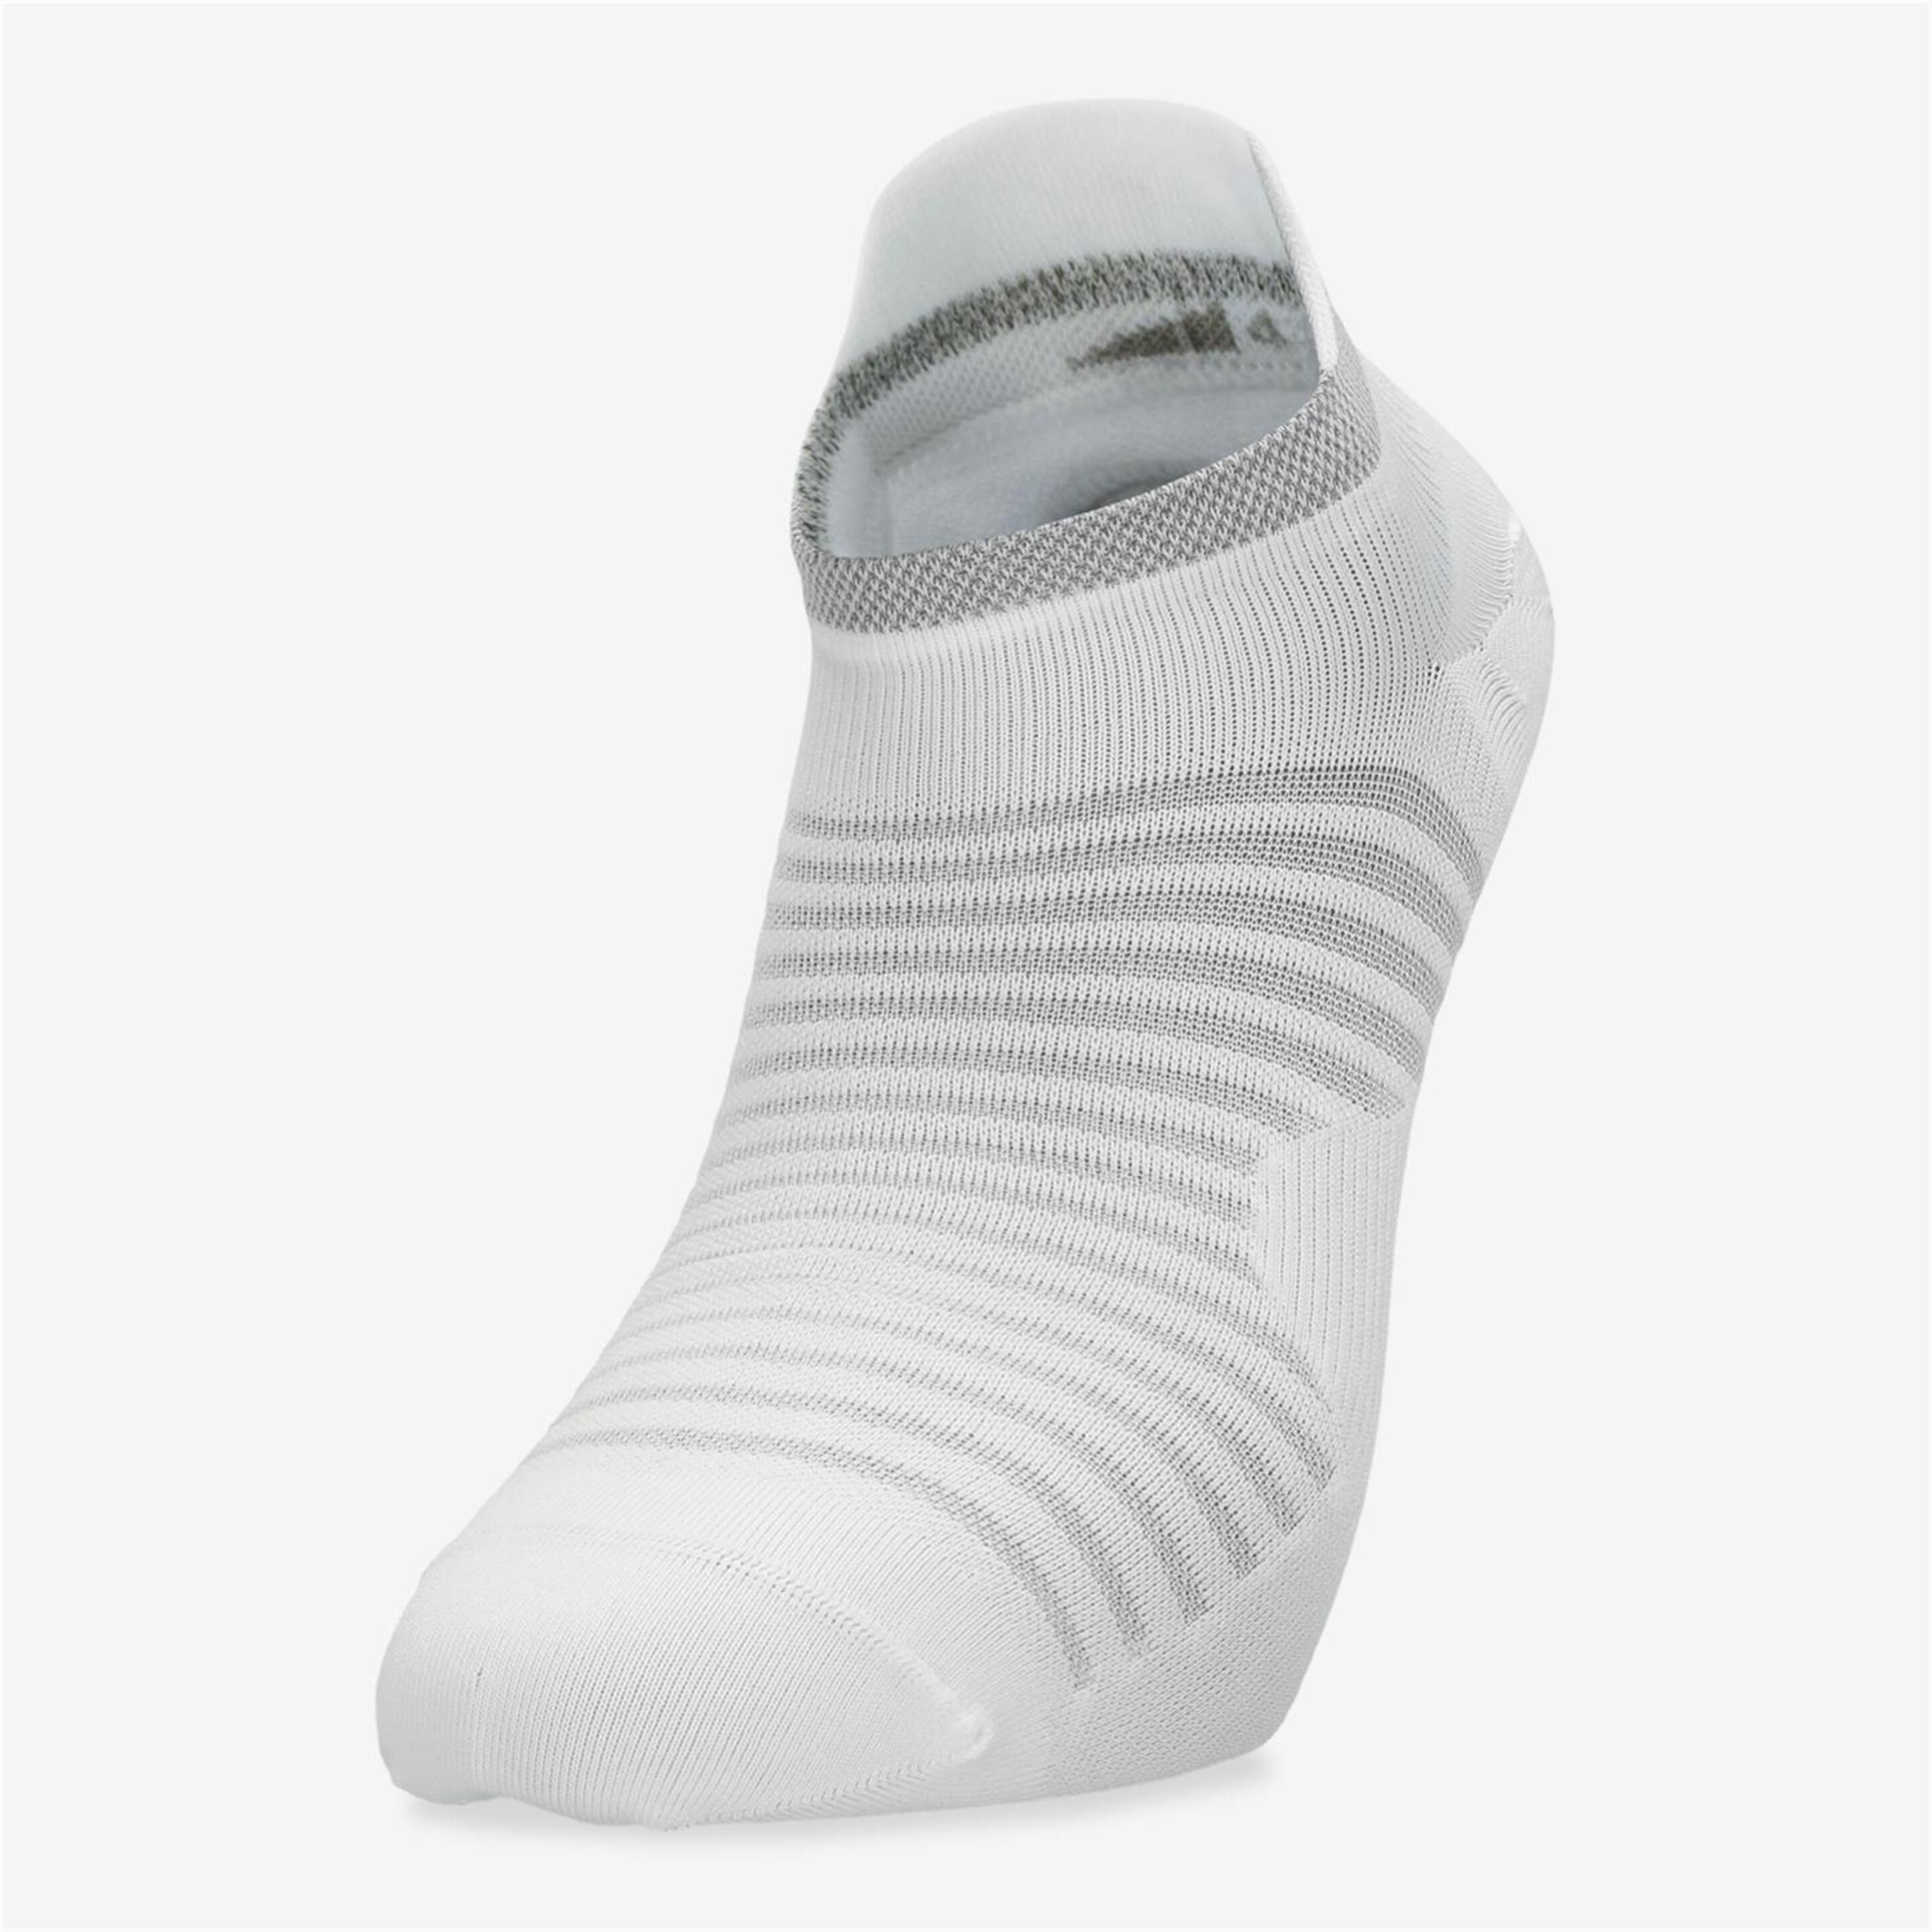 Calcetines Nike - blanco - Calcetines Invisibles Hombre